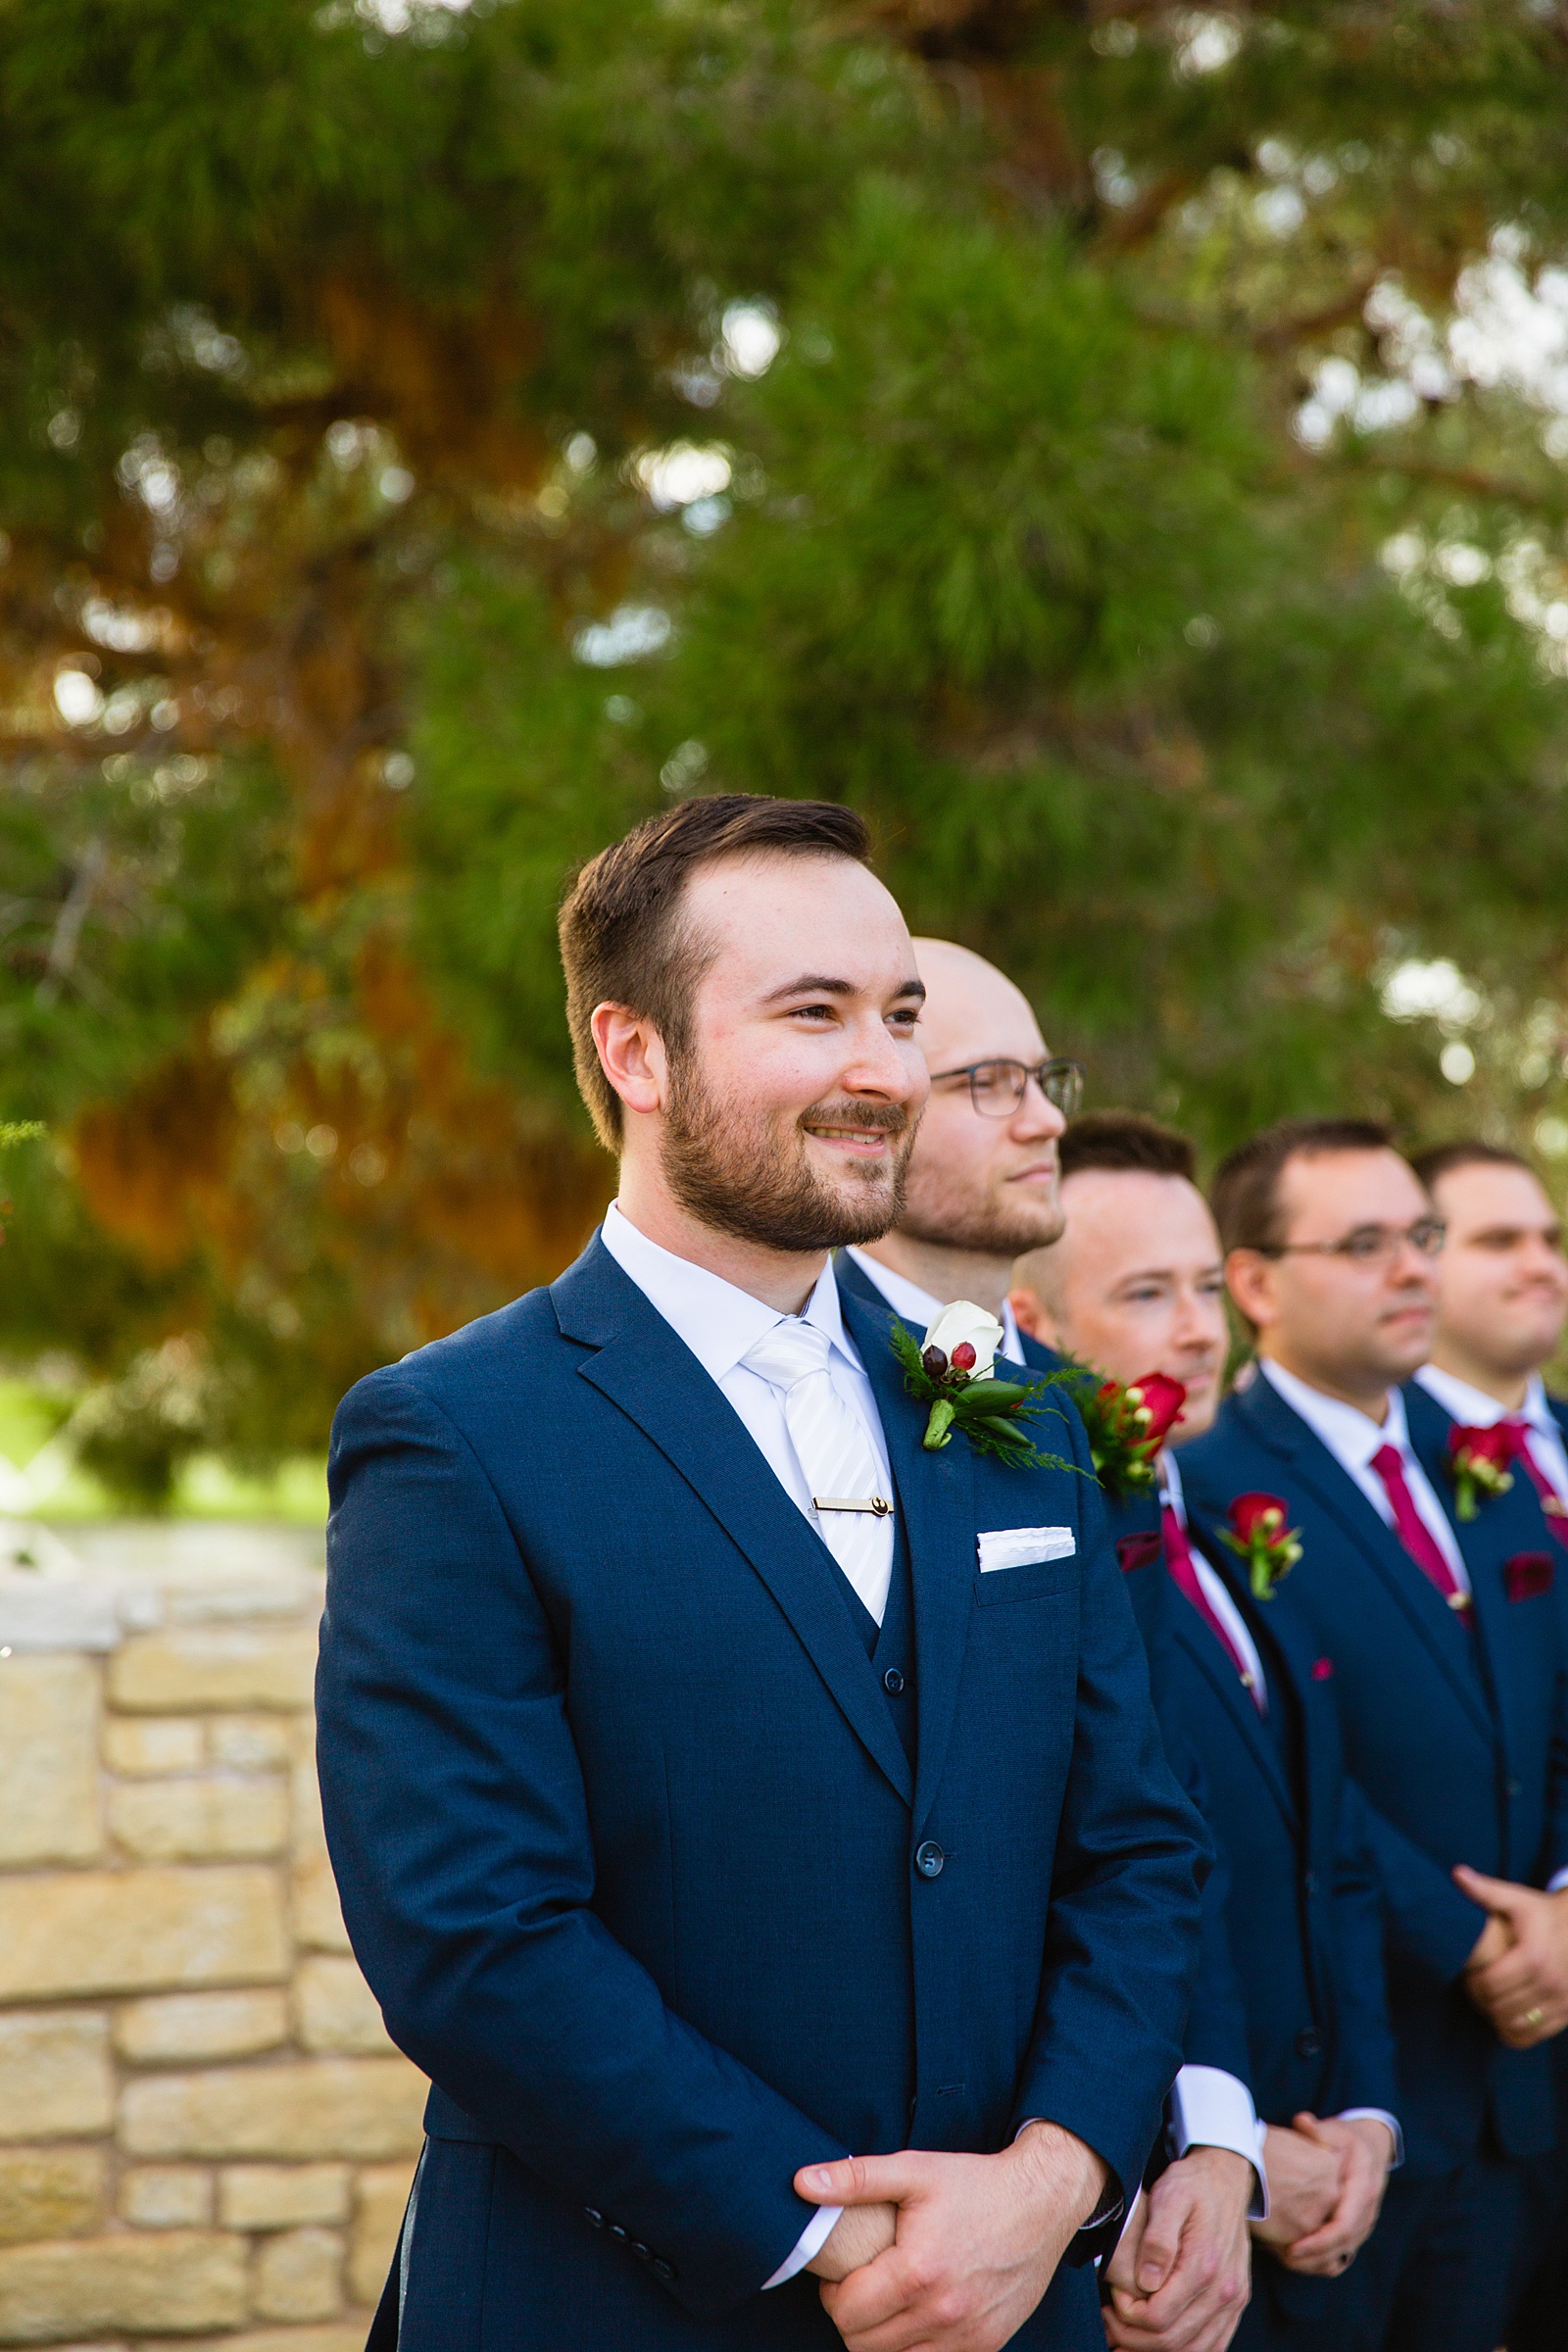 Groom as the bride walks down the aisle by PMA Photography.